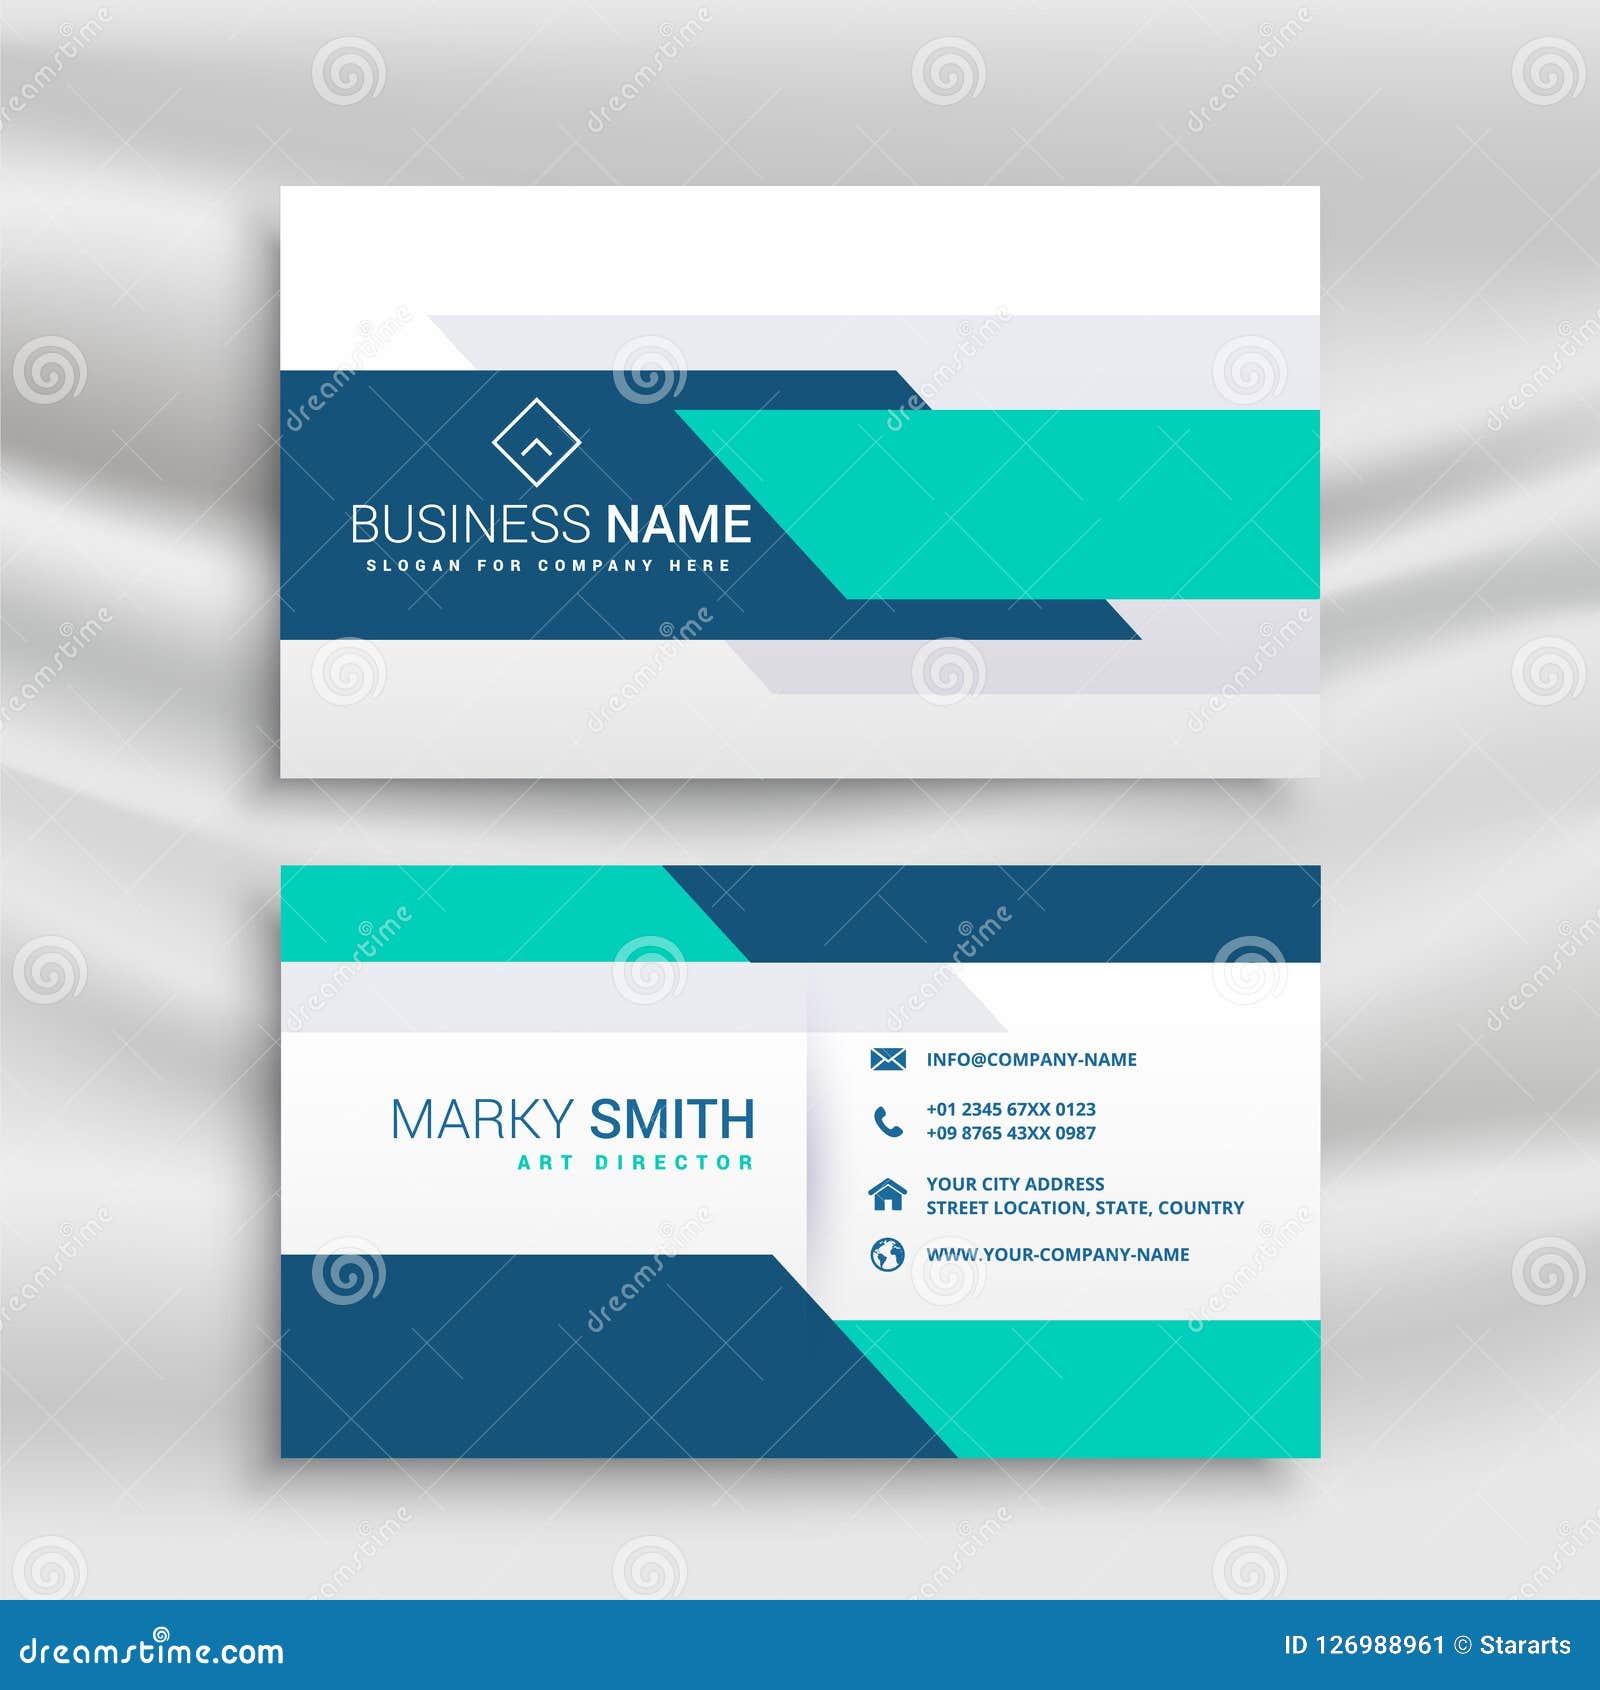 Medical Doctor Business Card Template - PPT Template Free 22 With Regard To Medical Business Cards Templates Free